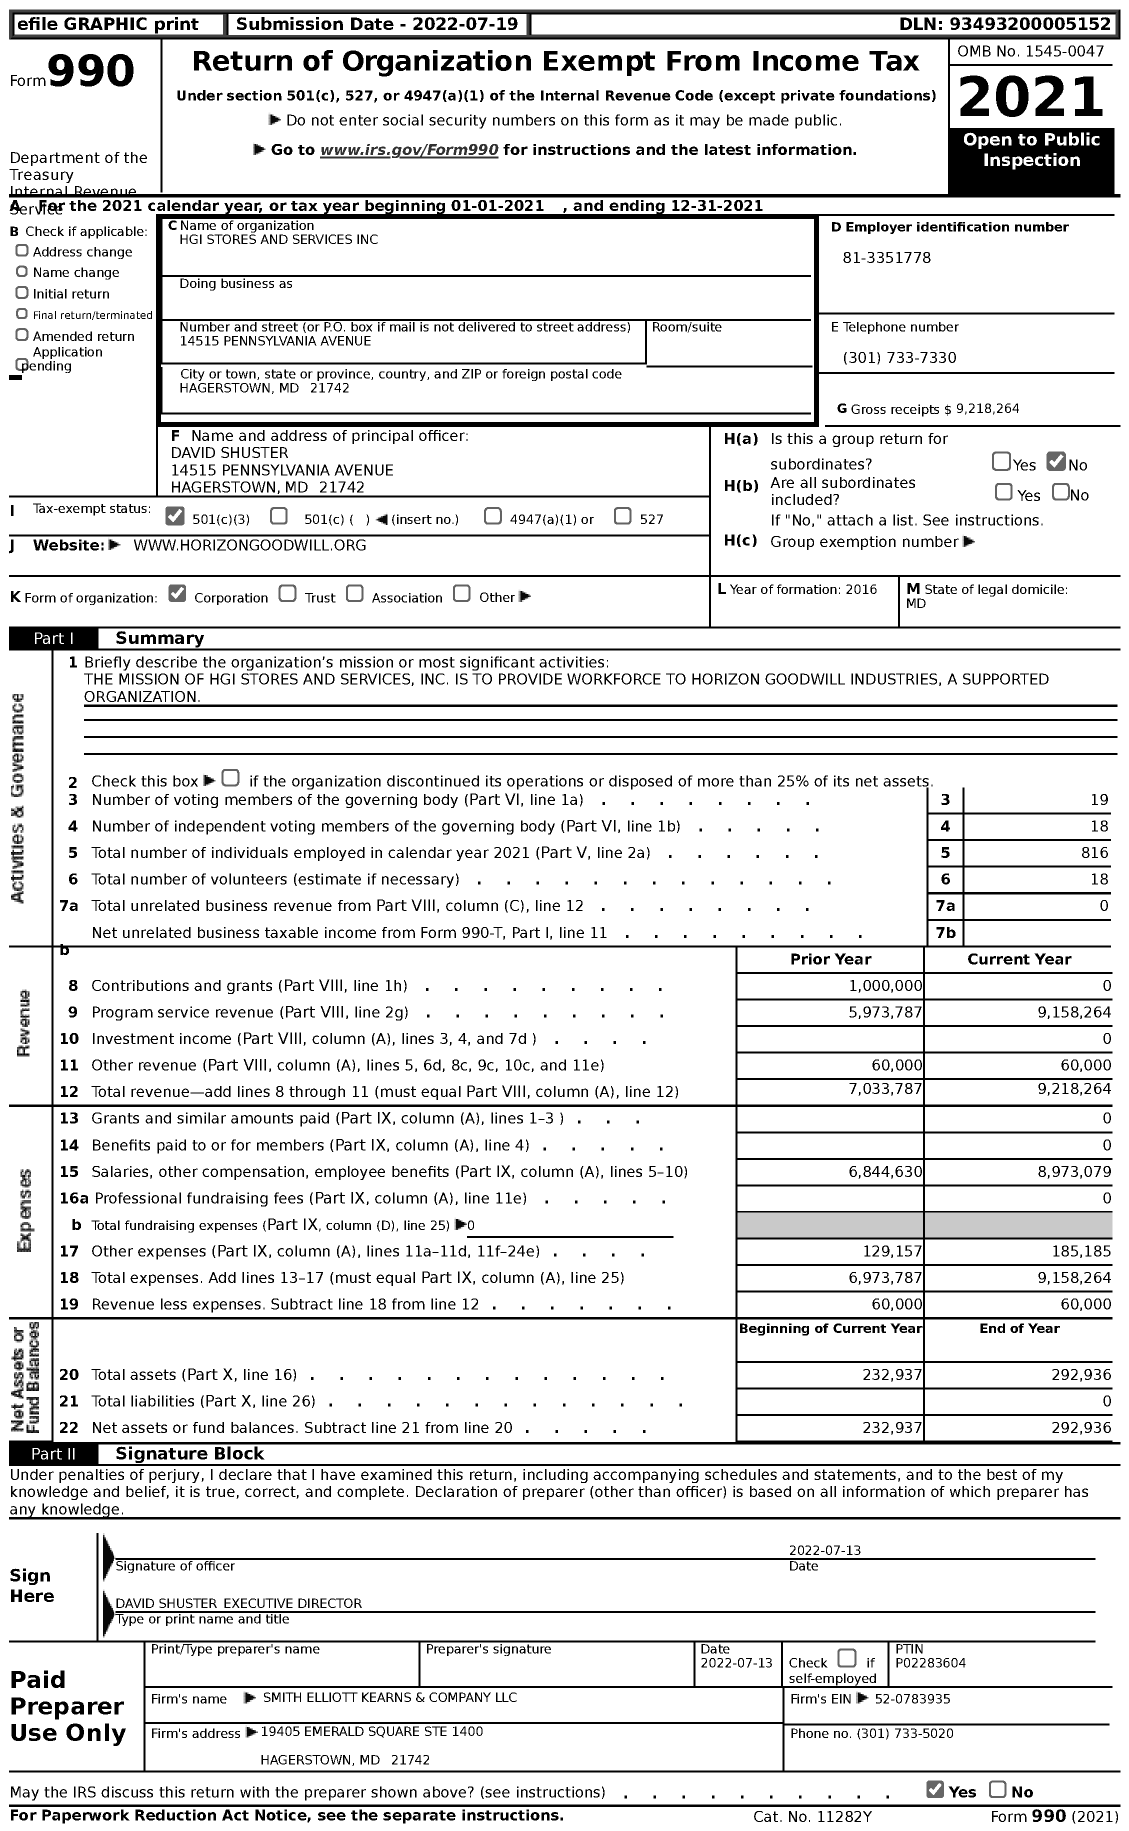 Image of first page of 2021 Form 990 for Hgi Stores and Services